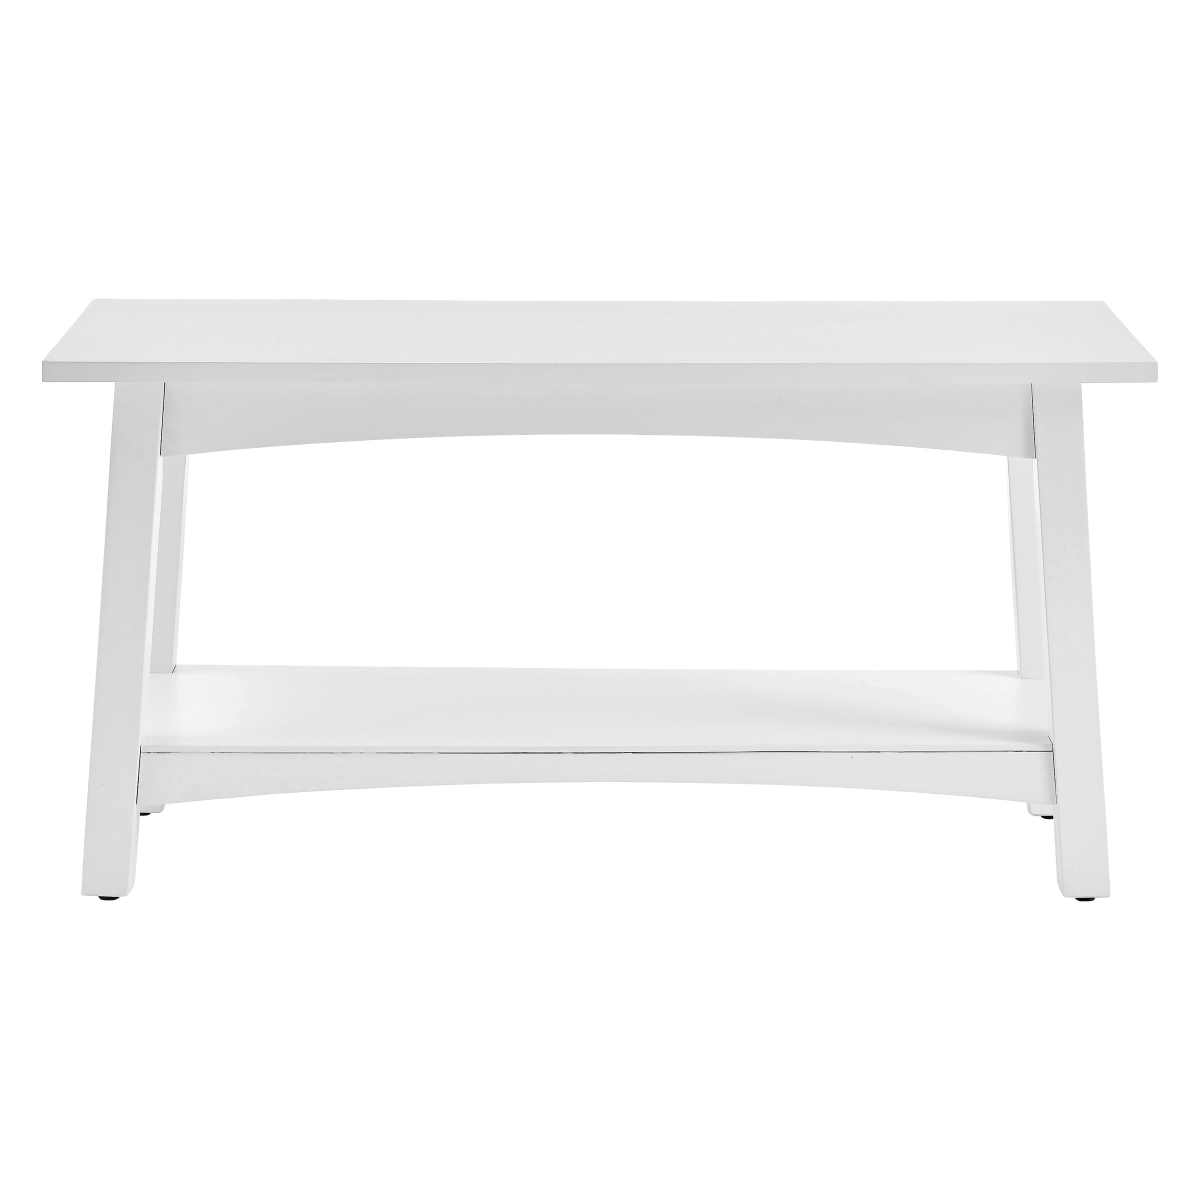 Picture of Alaterre ANCB03WH 36 in. Craftsbury Wood Entryway Bench